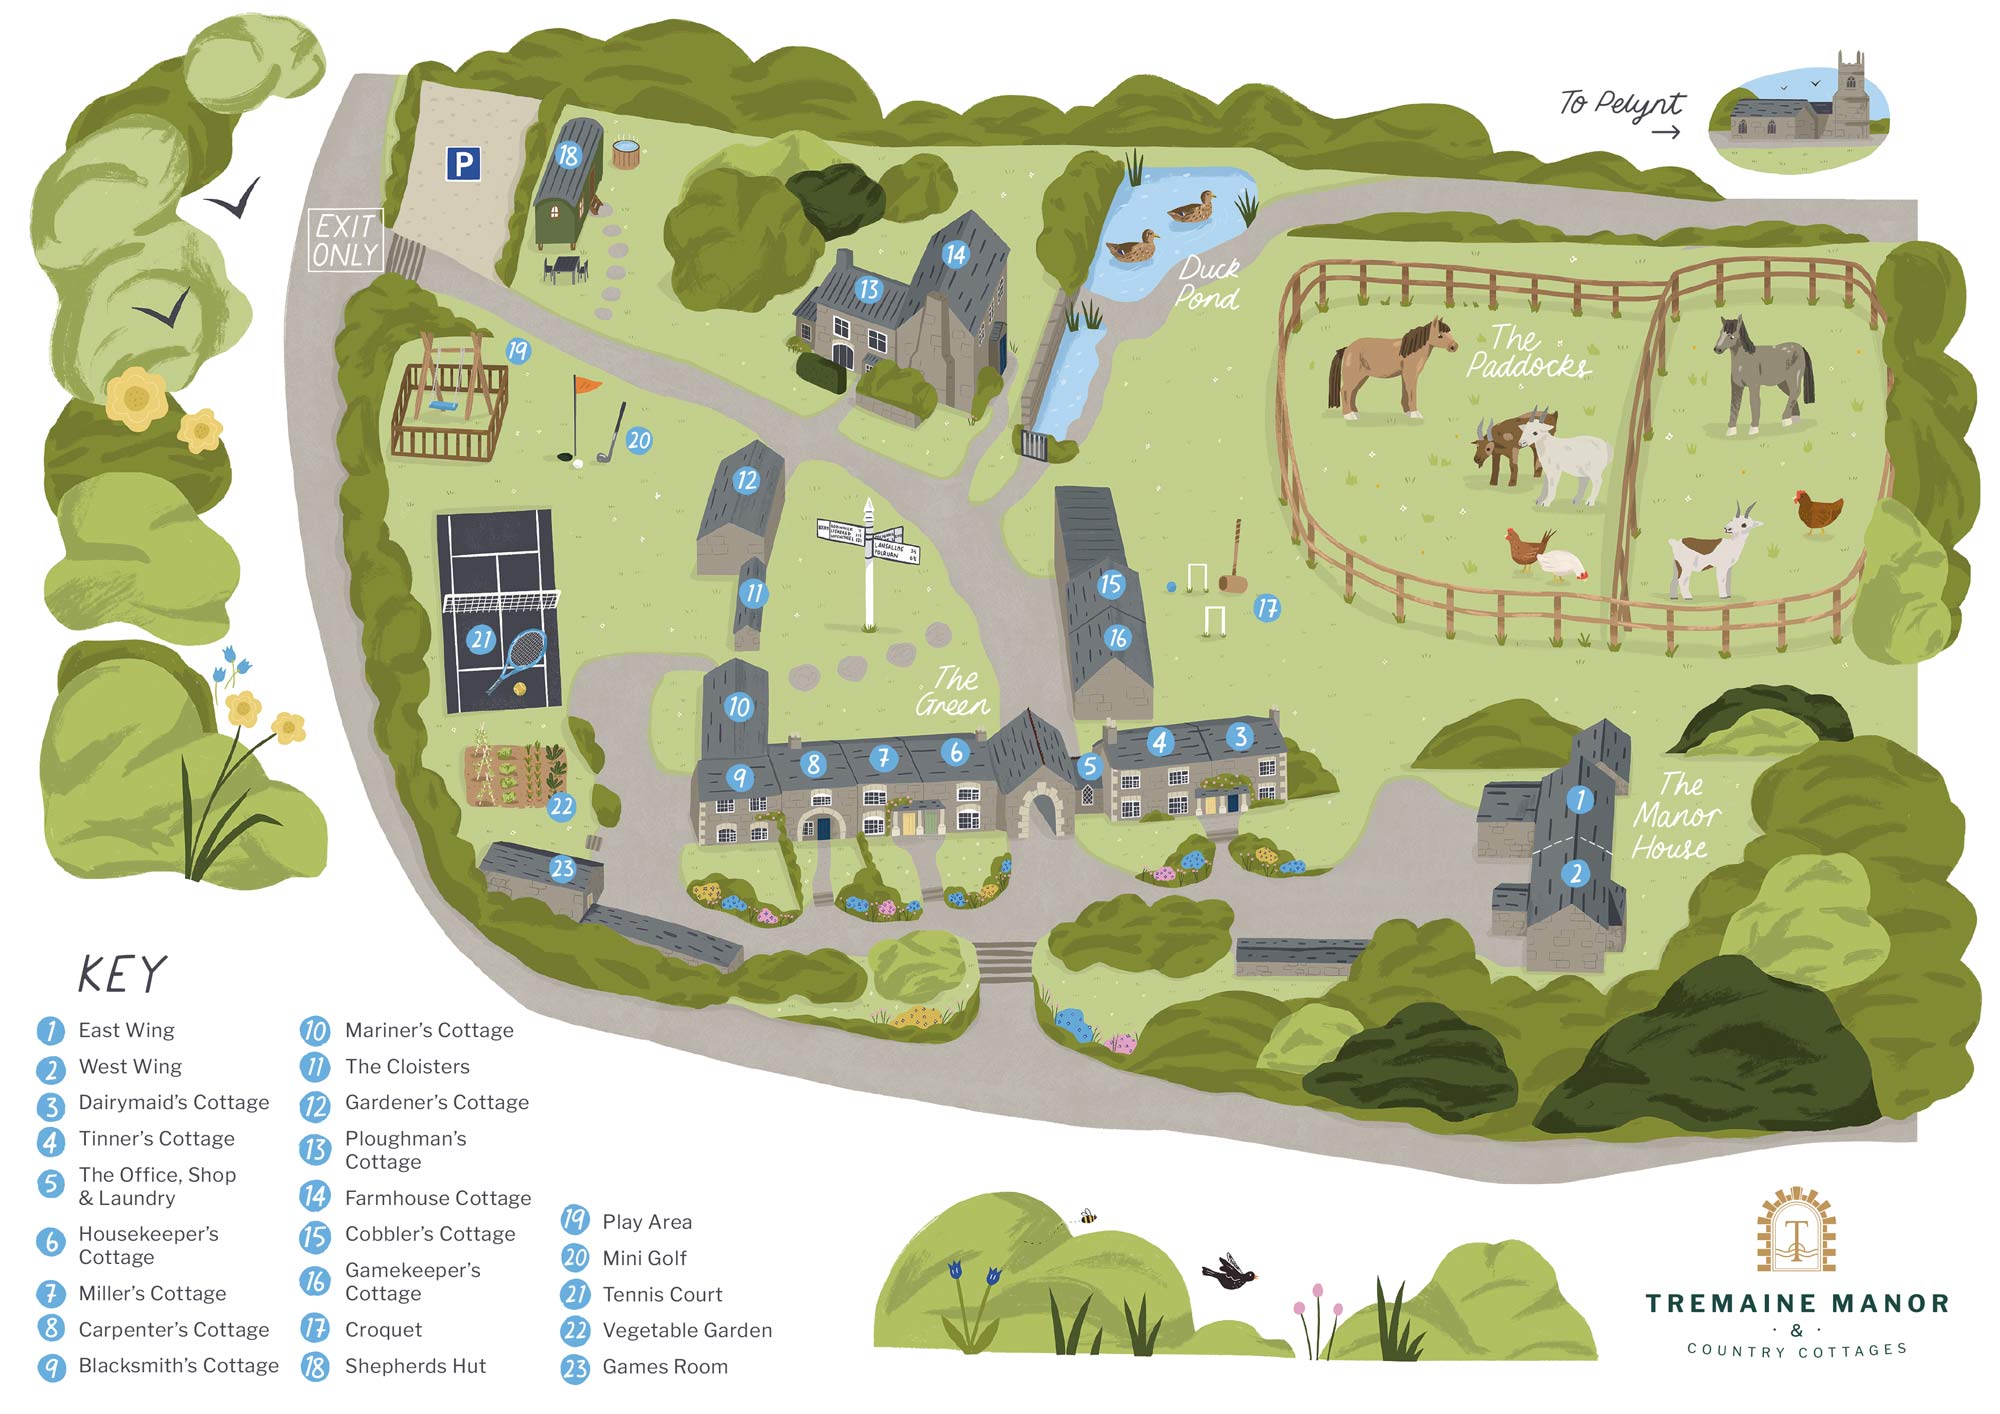 Map of Tremaine Manor and Country Cottages by Elly Jahnz